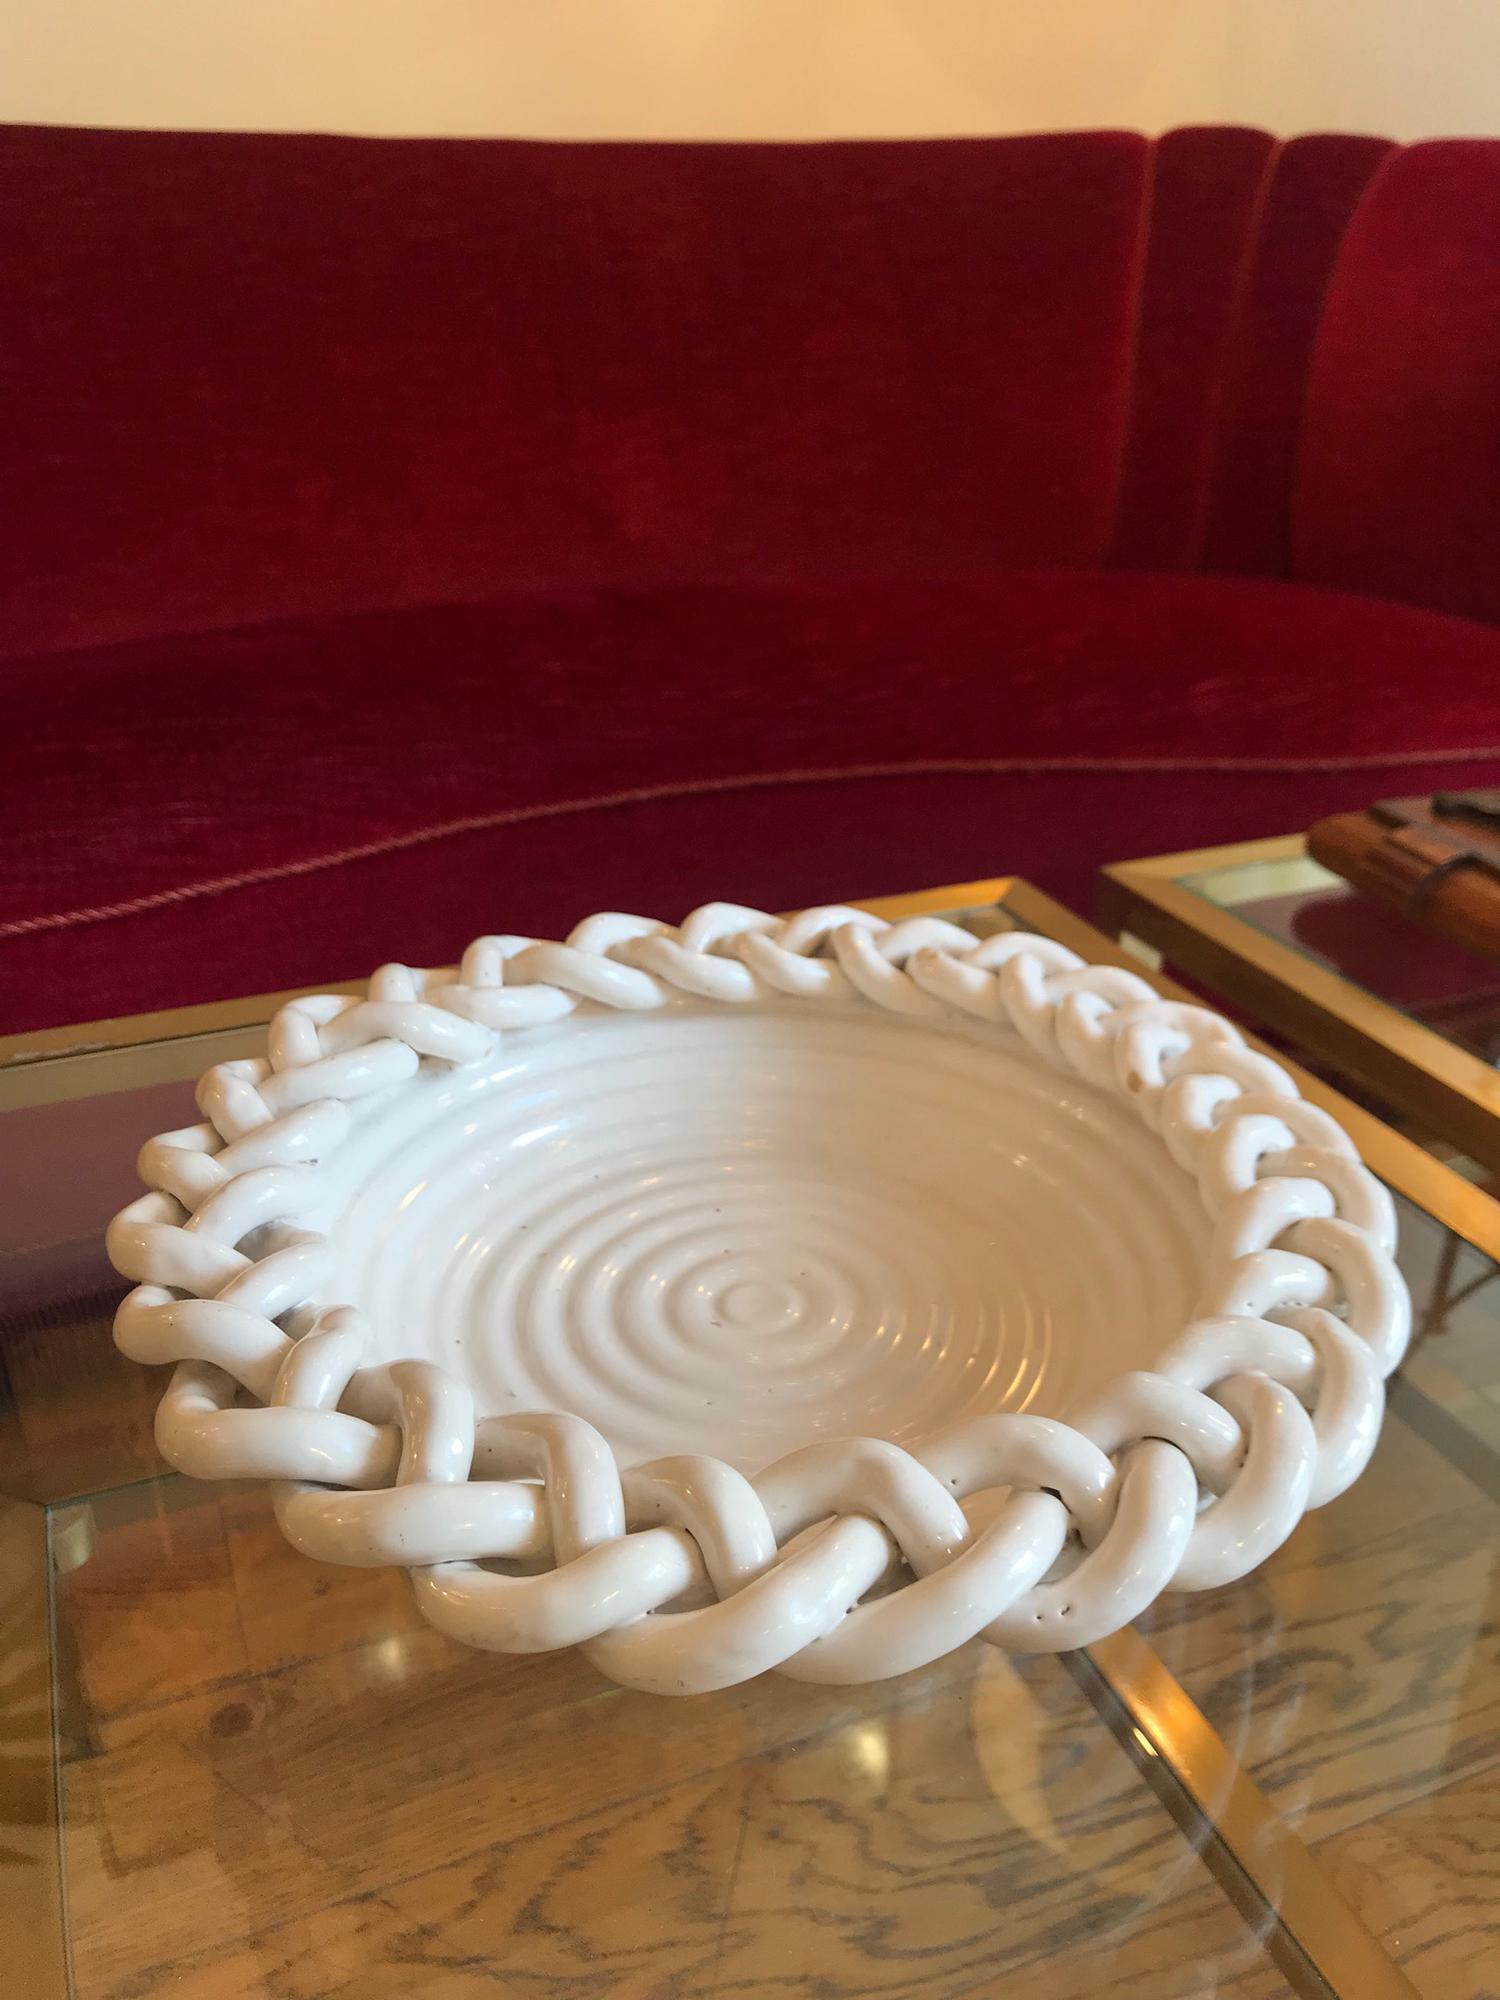 A large white glazed ceramic large bowl, with a braided border
Vallauris, France, circa 1955
monogrammed to the underside.